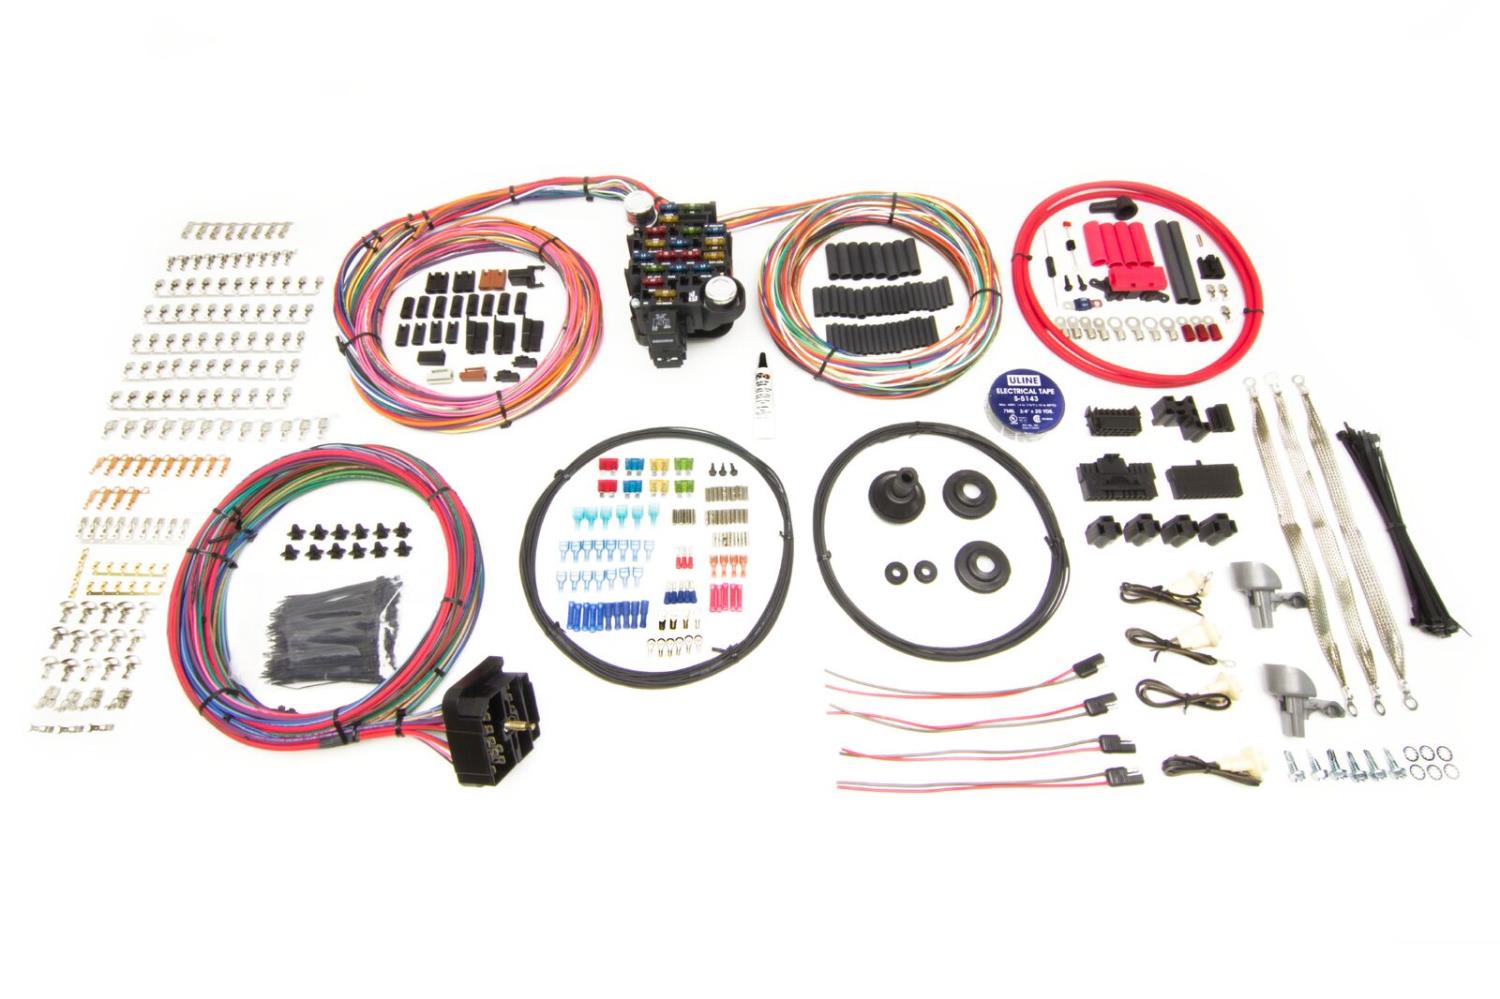 Pro-Series 25-Circuit Wire Harness Kit